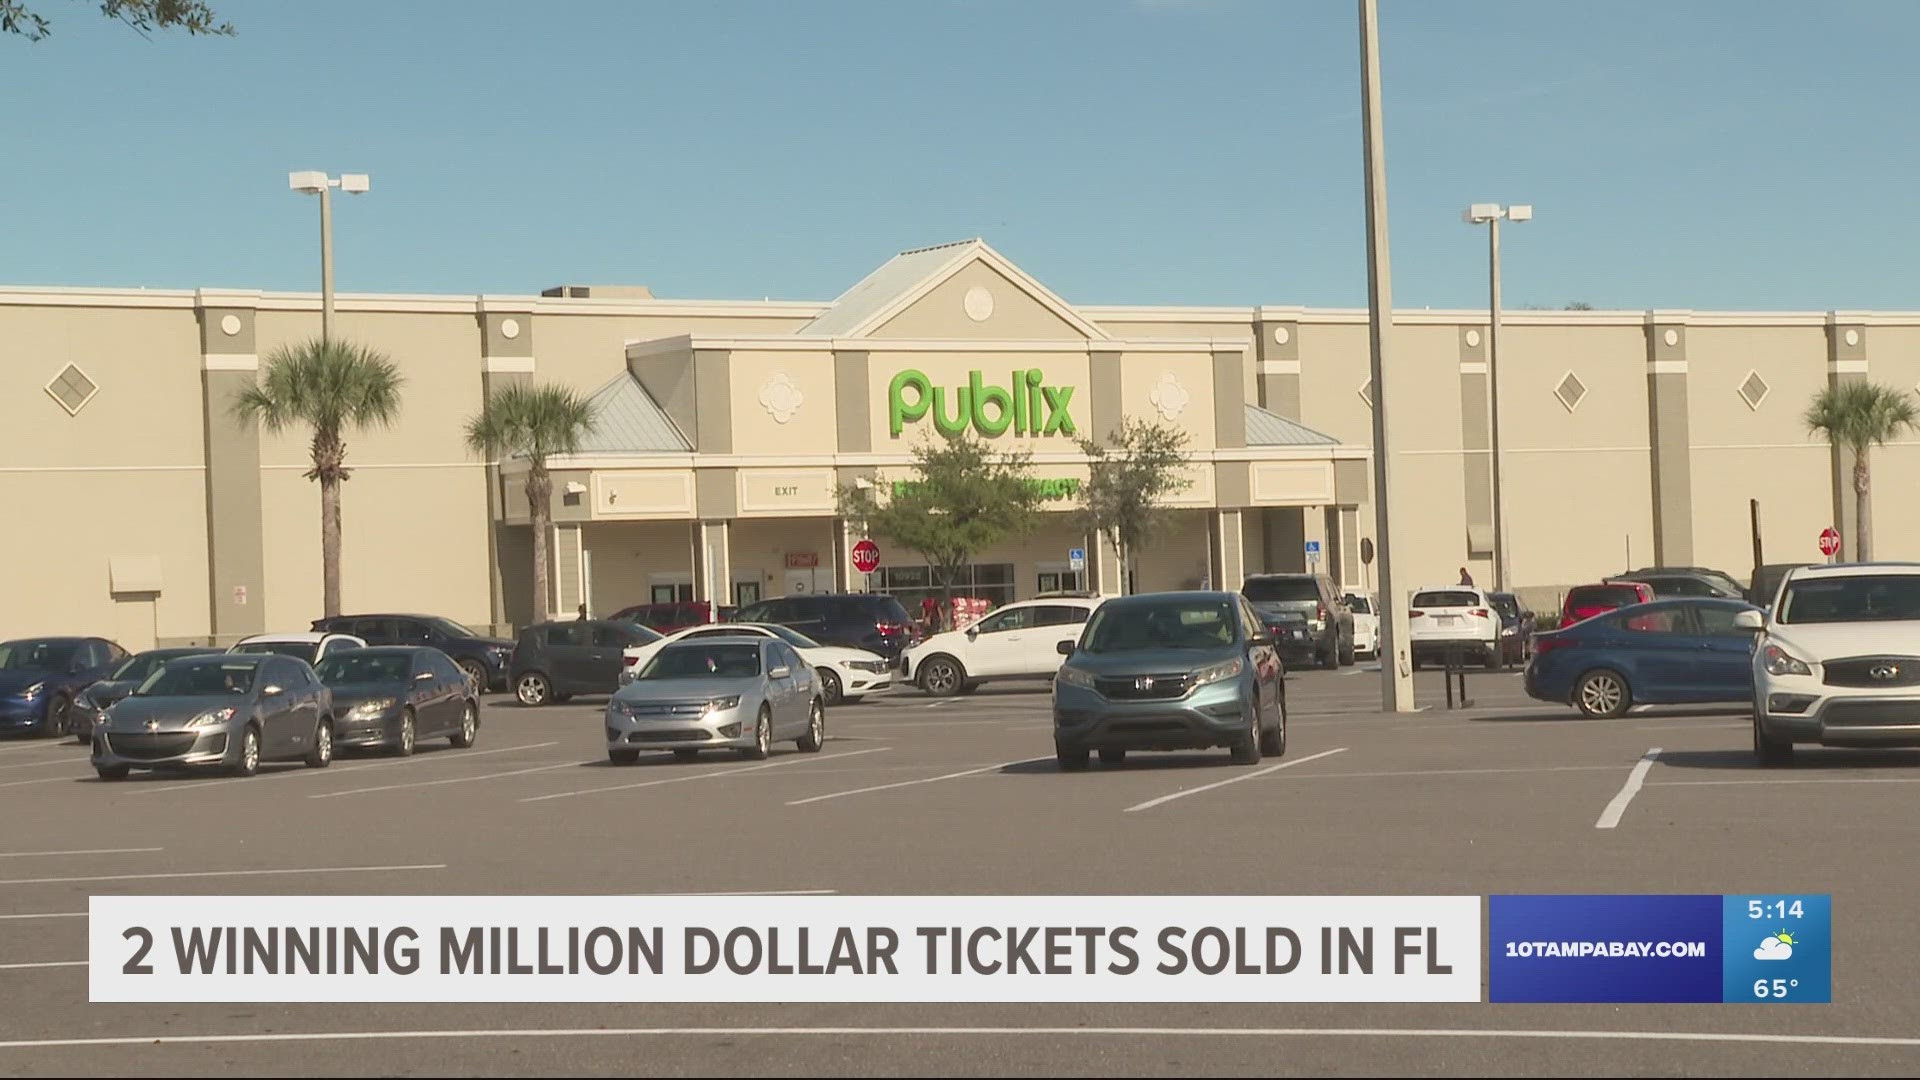 The winning Florida tickets matched all numbers except the Powerball, winning at least $1M.